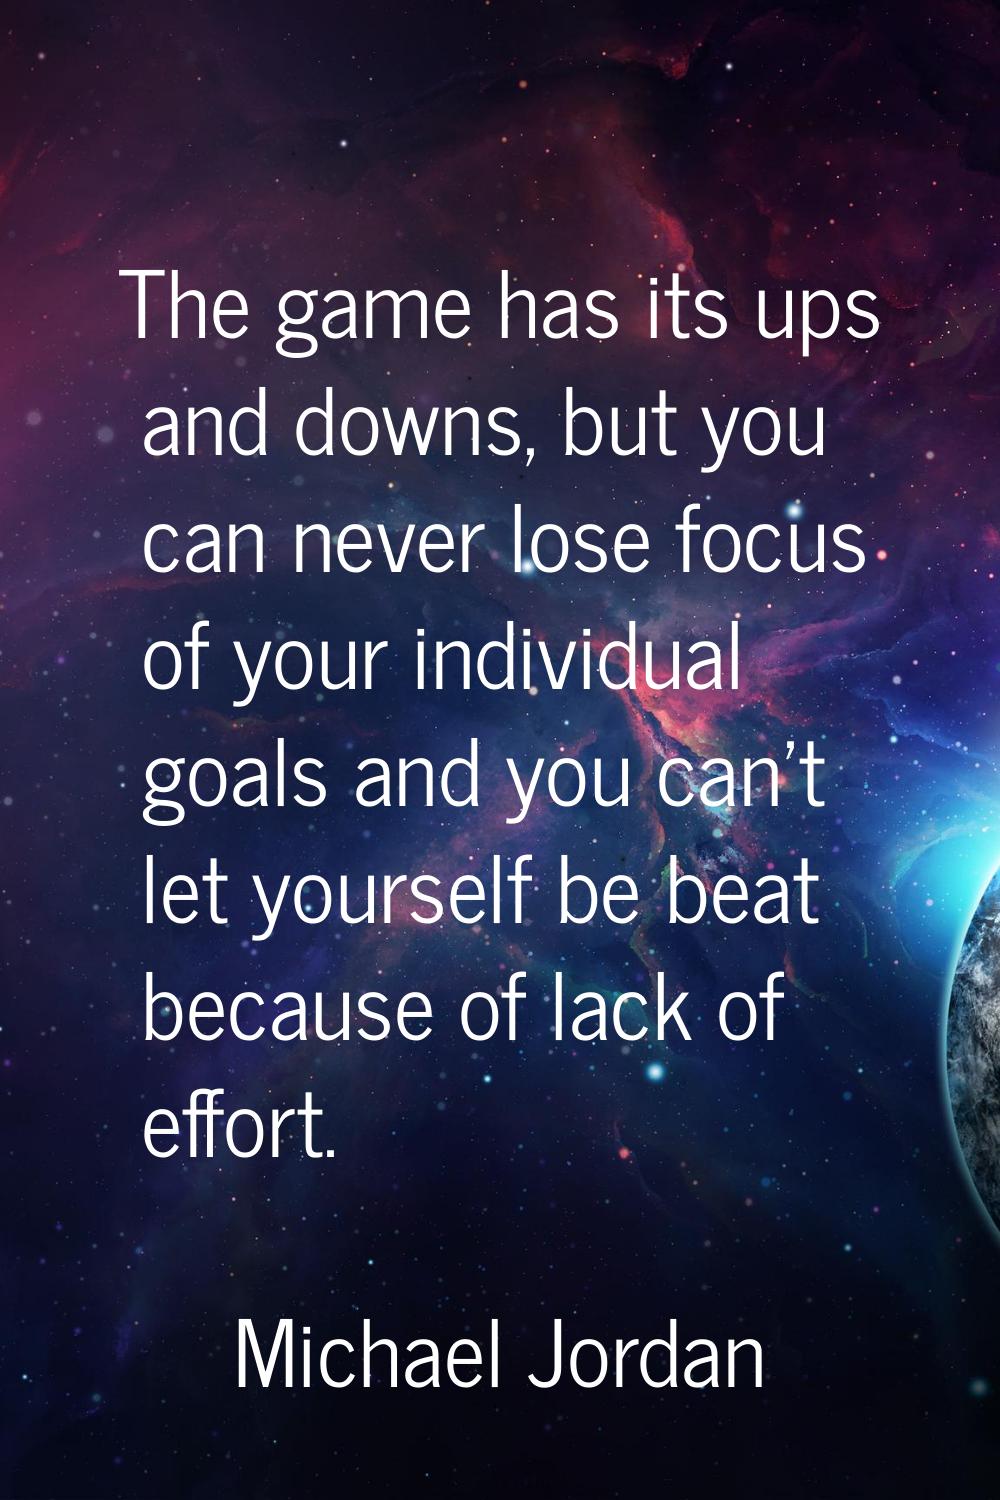 The game has its ups and downs, but you can never lose focus of your individual goals and you can't